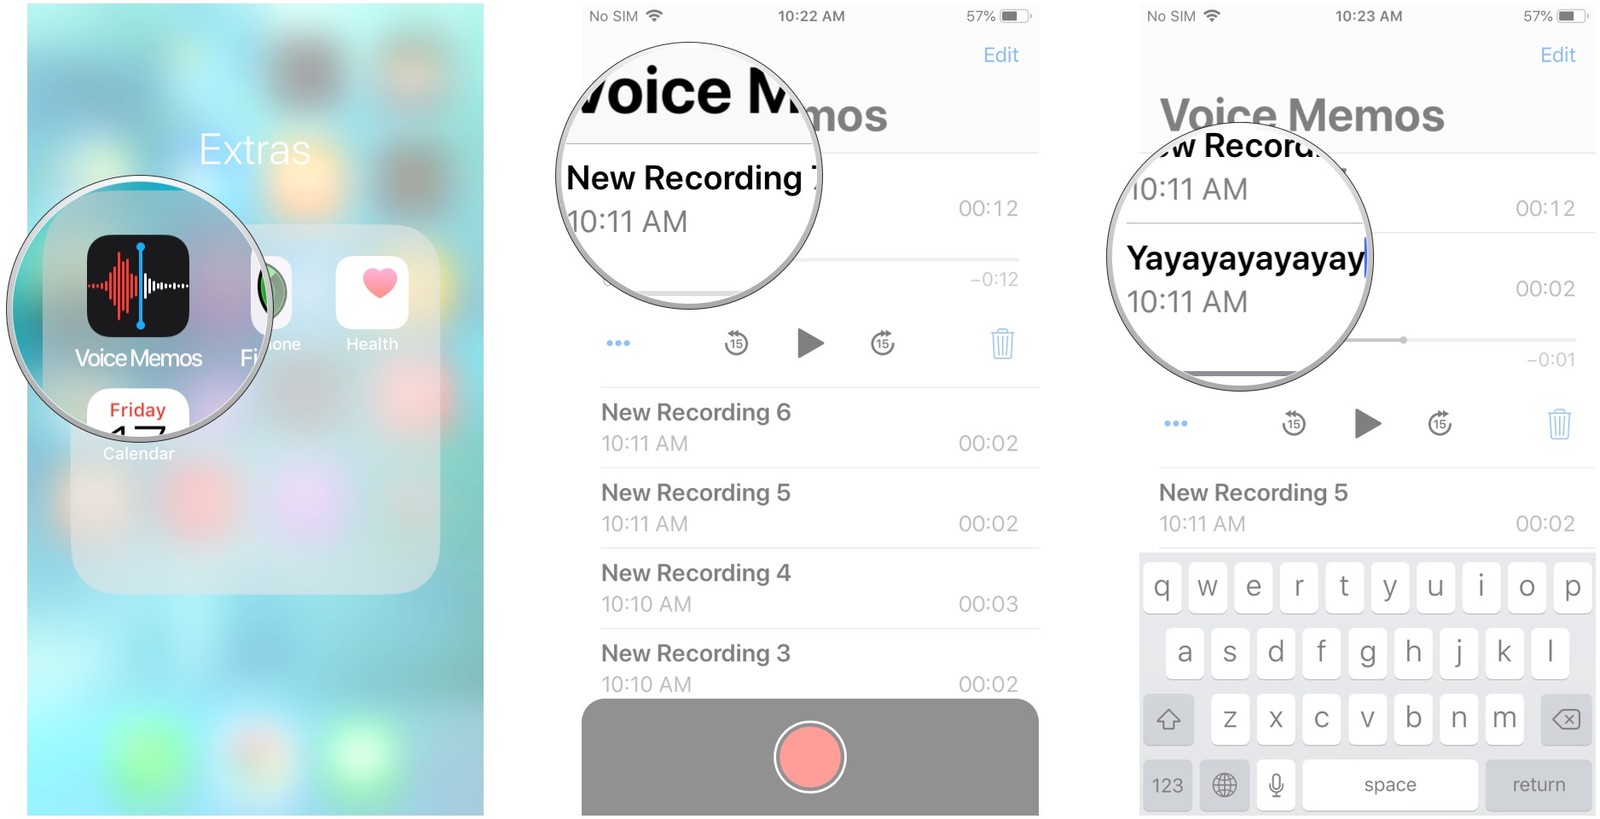 How to Fix Voice Memos is Not Saved After Recording on iPhone